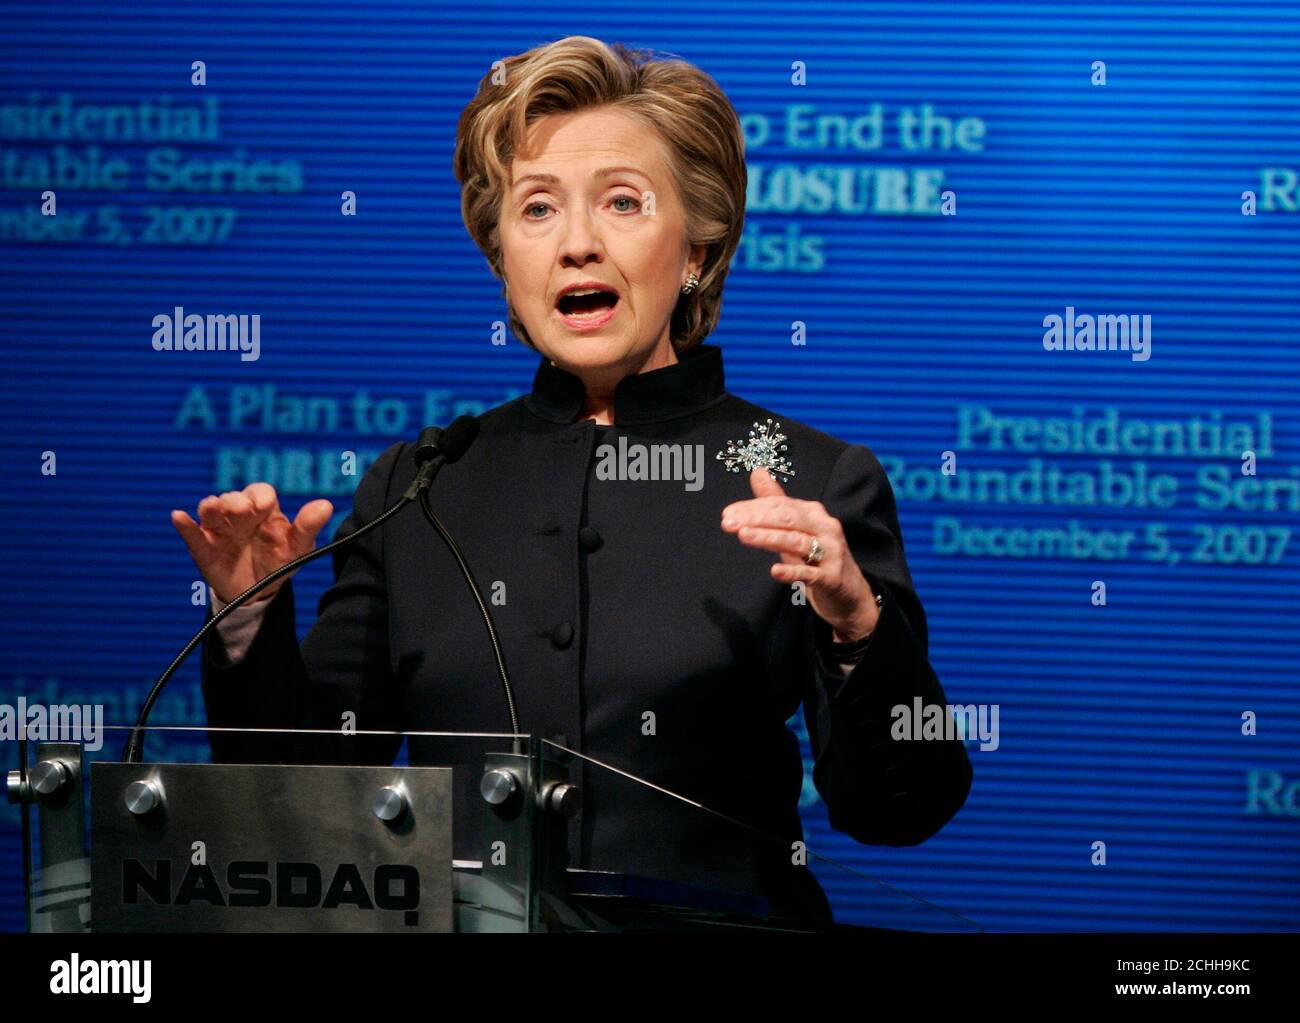 Democratic presidential candidate Senator Hillary Clinton (D-NY) delivers an economic policy address at the NASDAQ Marketsite in New York December 5, 2007. Clinton on Wednesday said Wall Street was partly to blame for the subprime mortgage mess and urged the investment community to back a five-year freeze on resets of interest rates on subprime home loans. REUTERS/Shannon Stapleton (UNITED STATES) Stock Photo